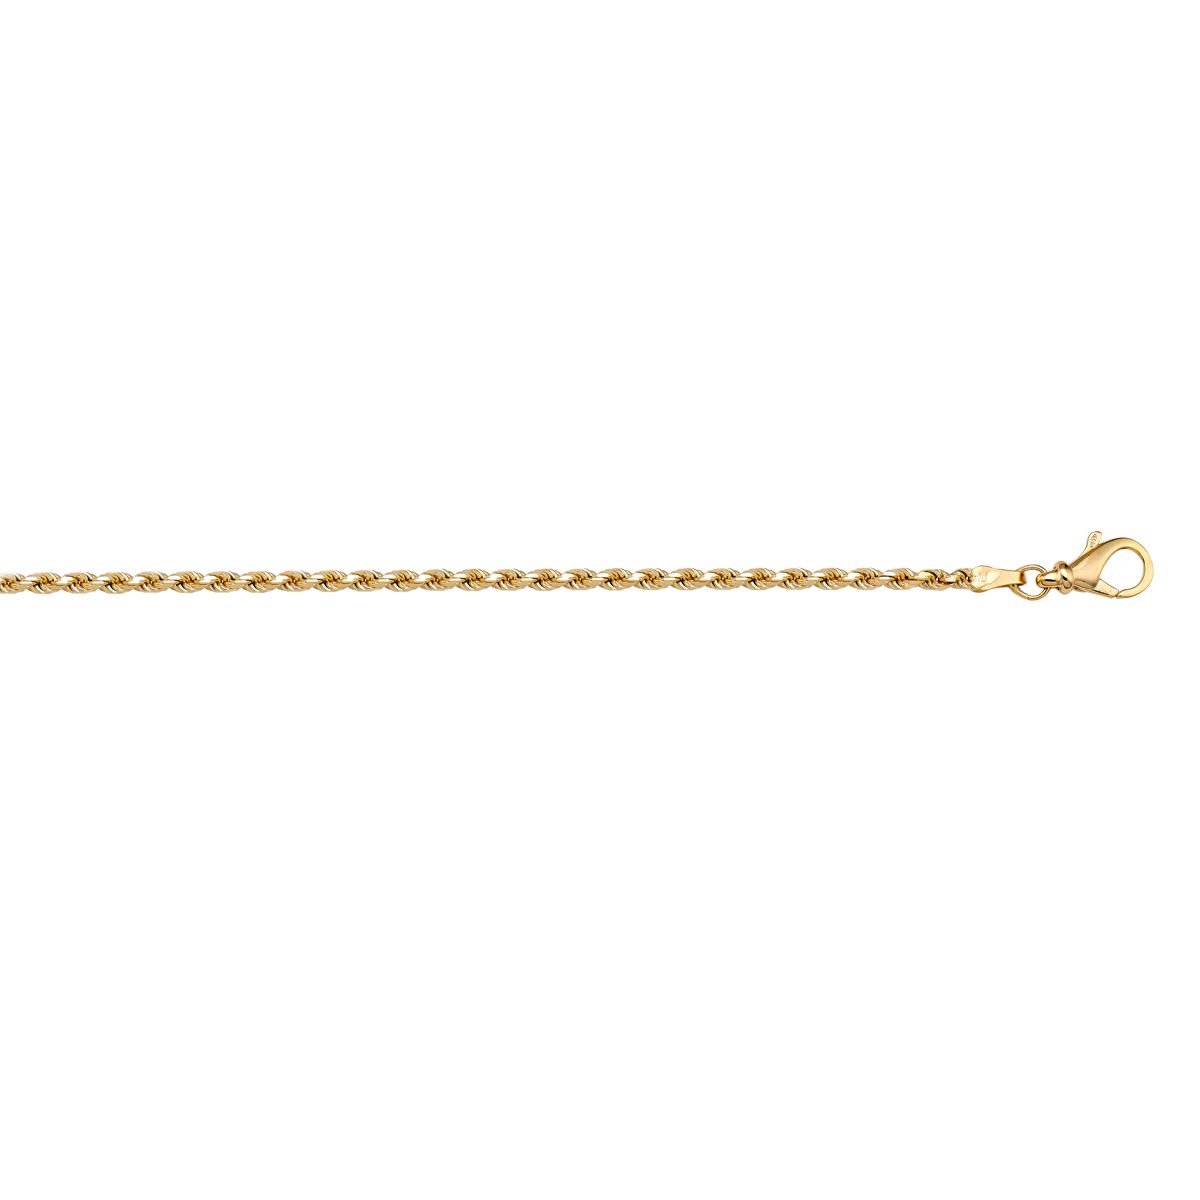 CROP02, Gold Chain, Diamond Cut Rope, Yellow Gold, 1.3 to 2.7 mm